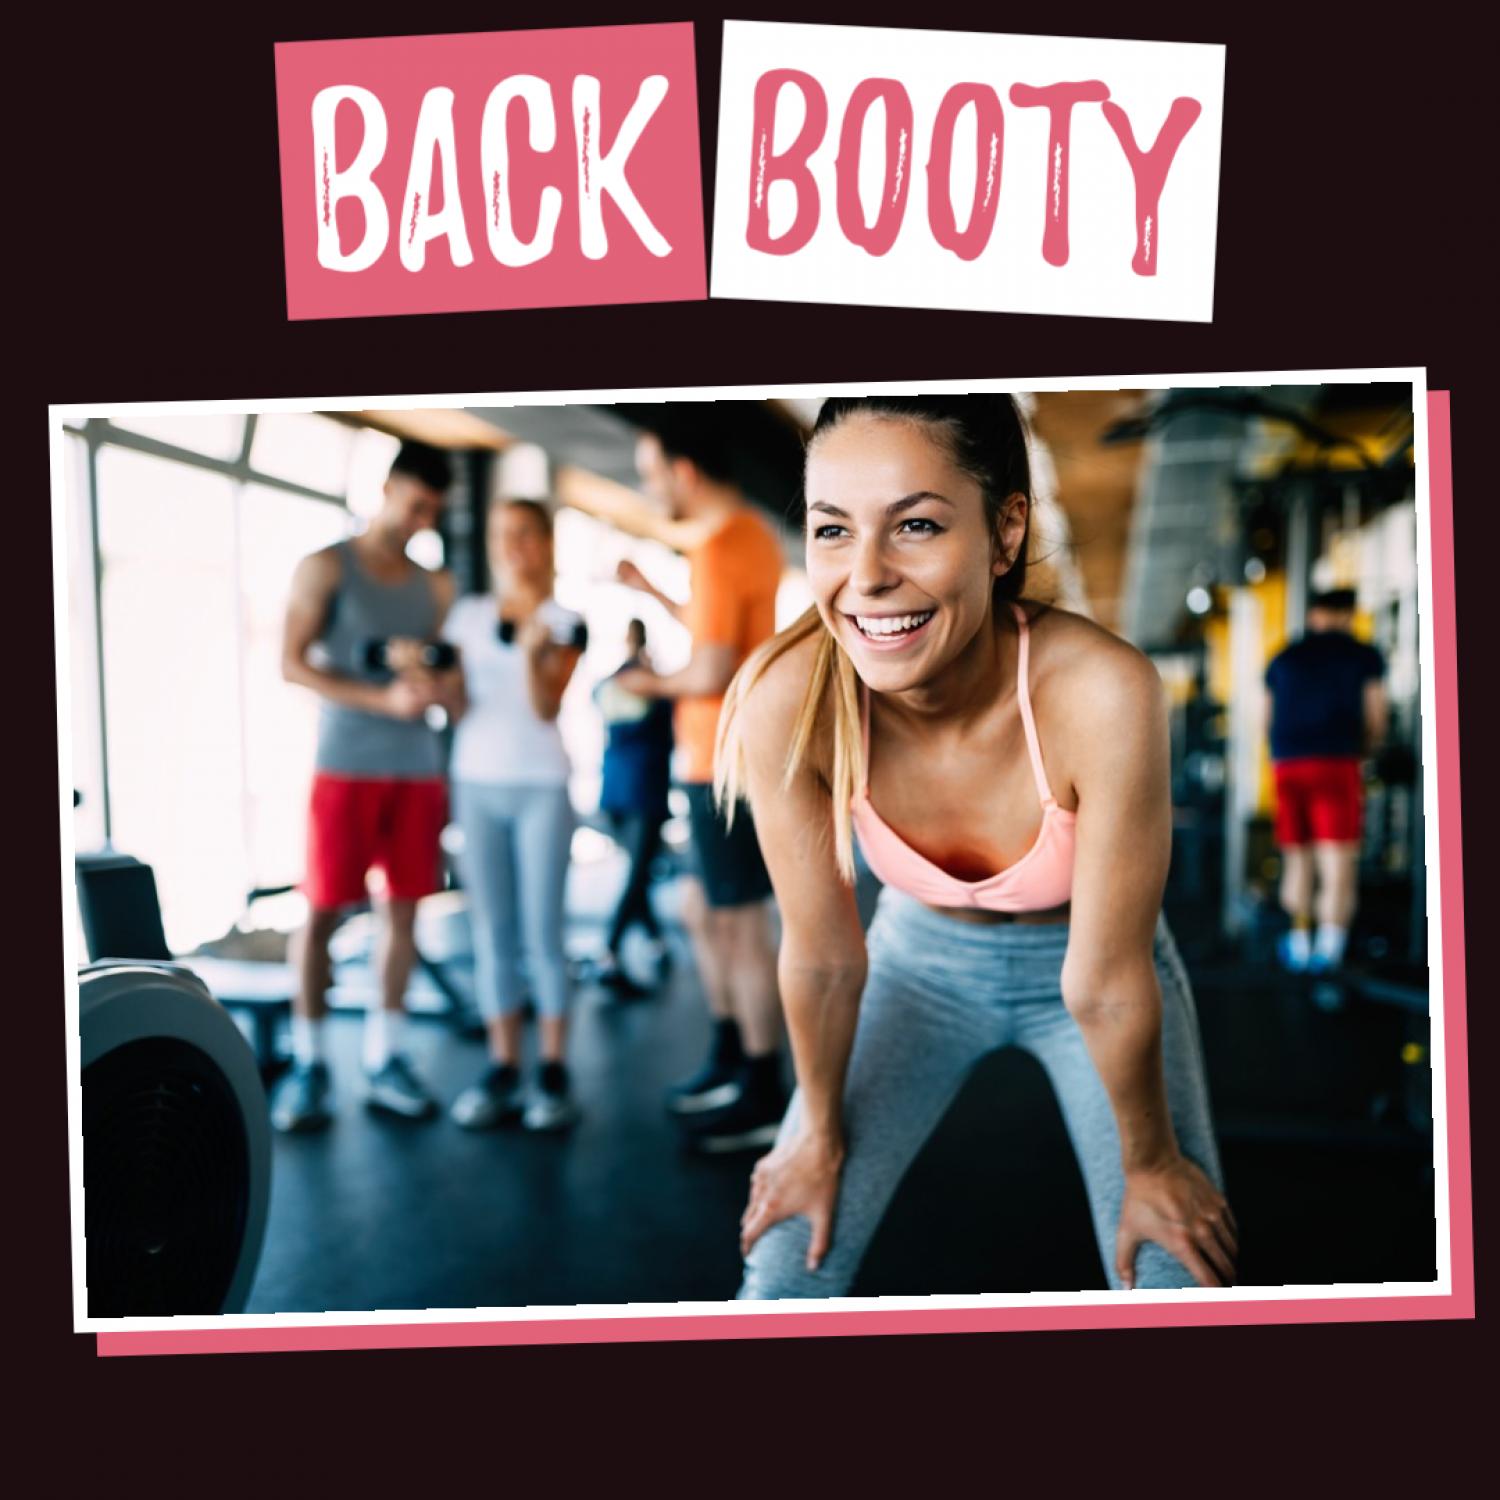 Back and Booty by the Fit Boss